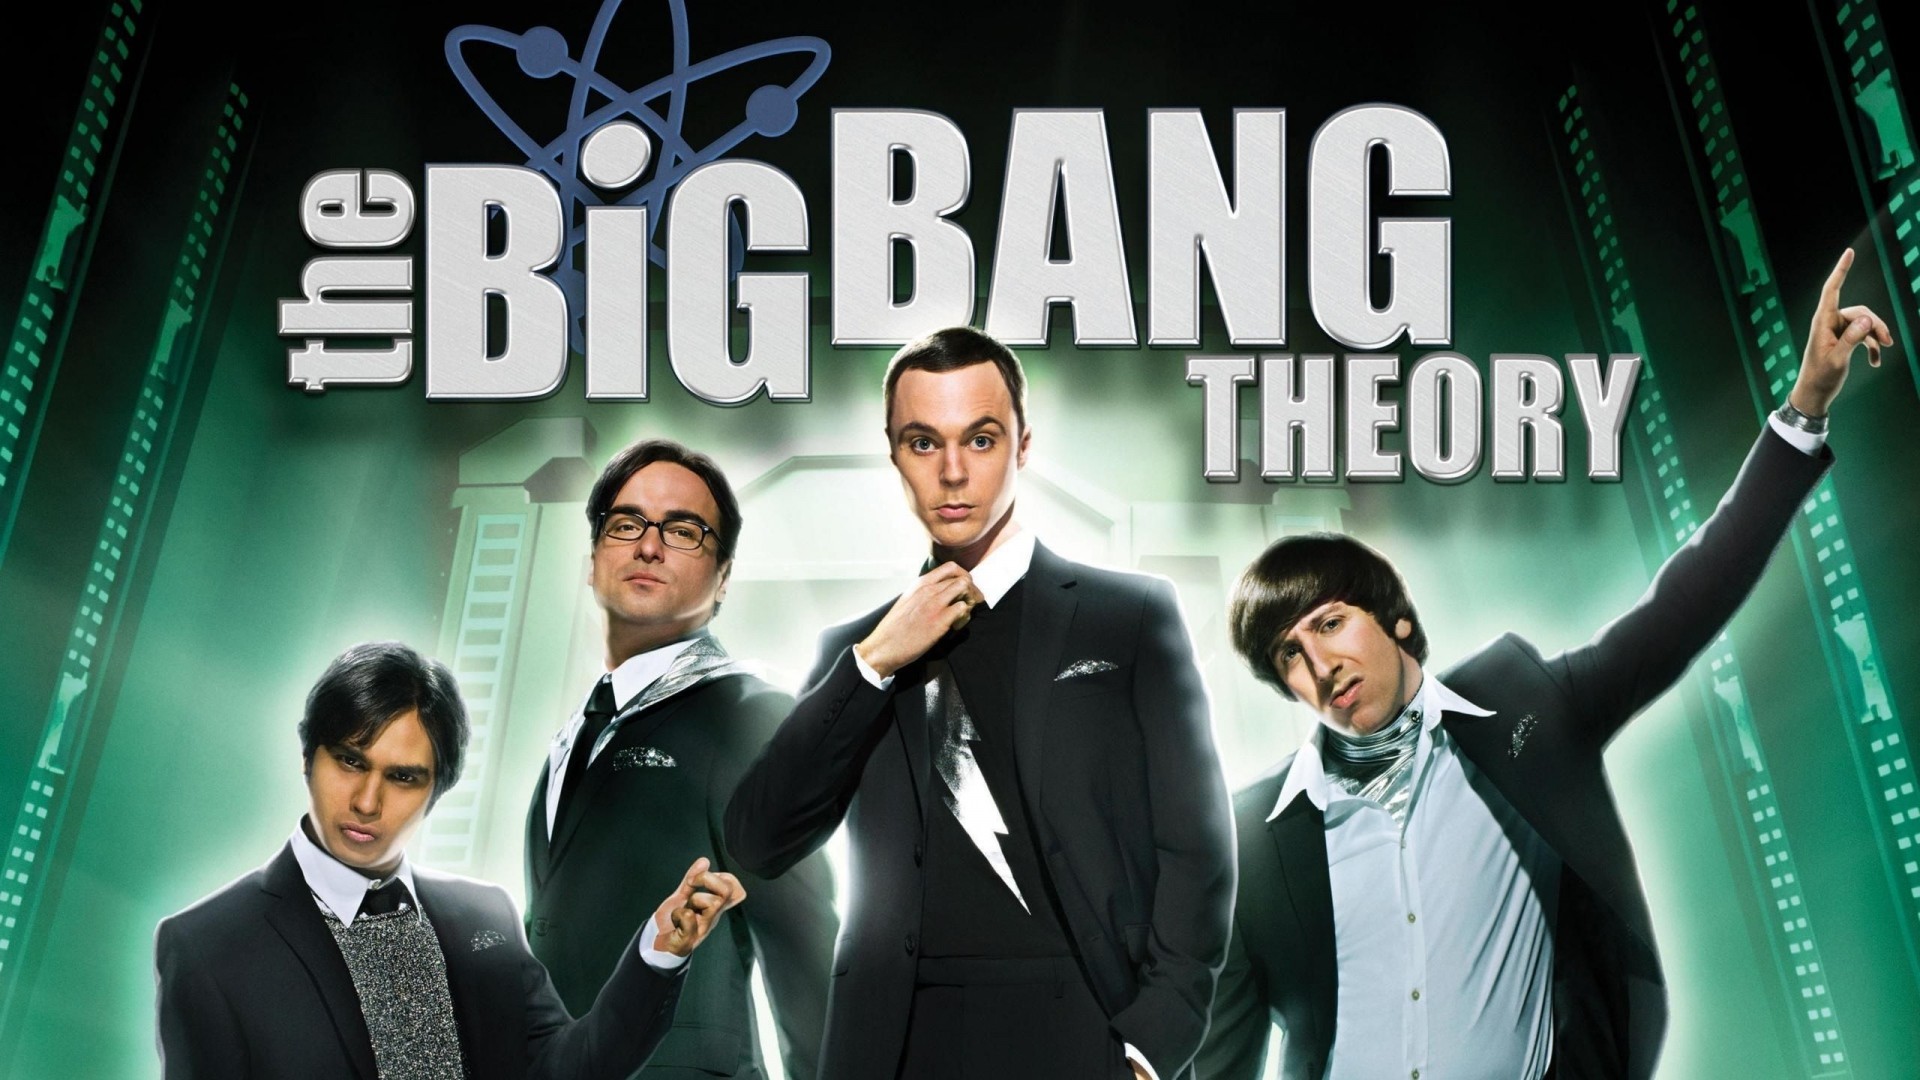 1920x1080 ... botany news, pictures and videos and learn all about the big bang  theory, main characters, botany from wallpapers4u.org, your wallpaper news  source.